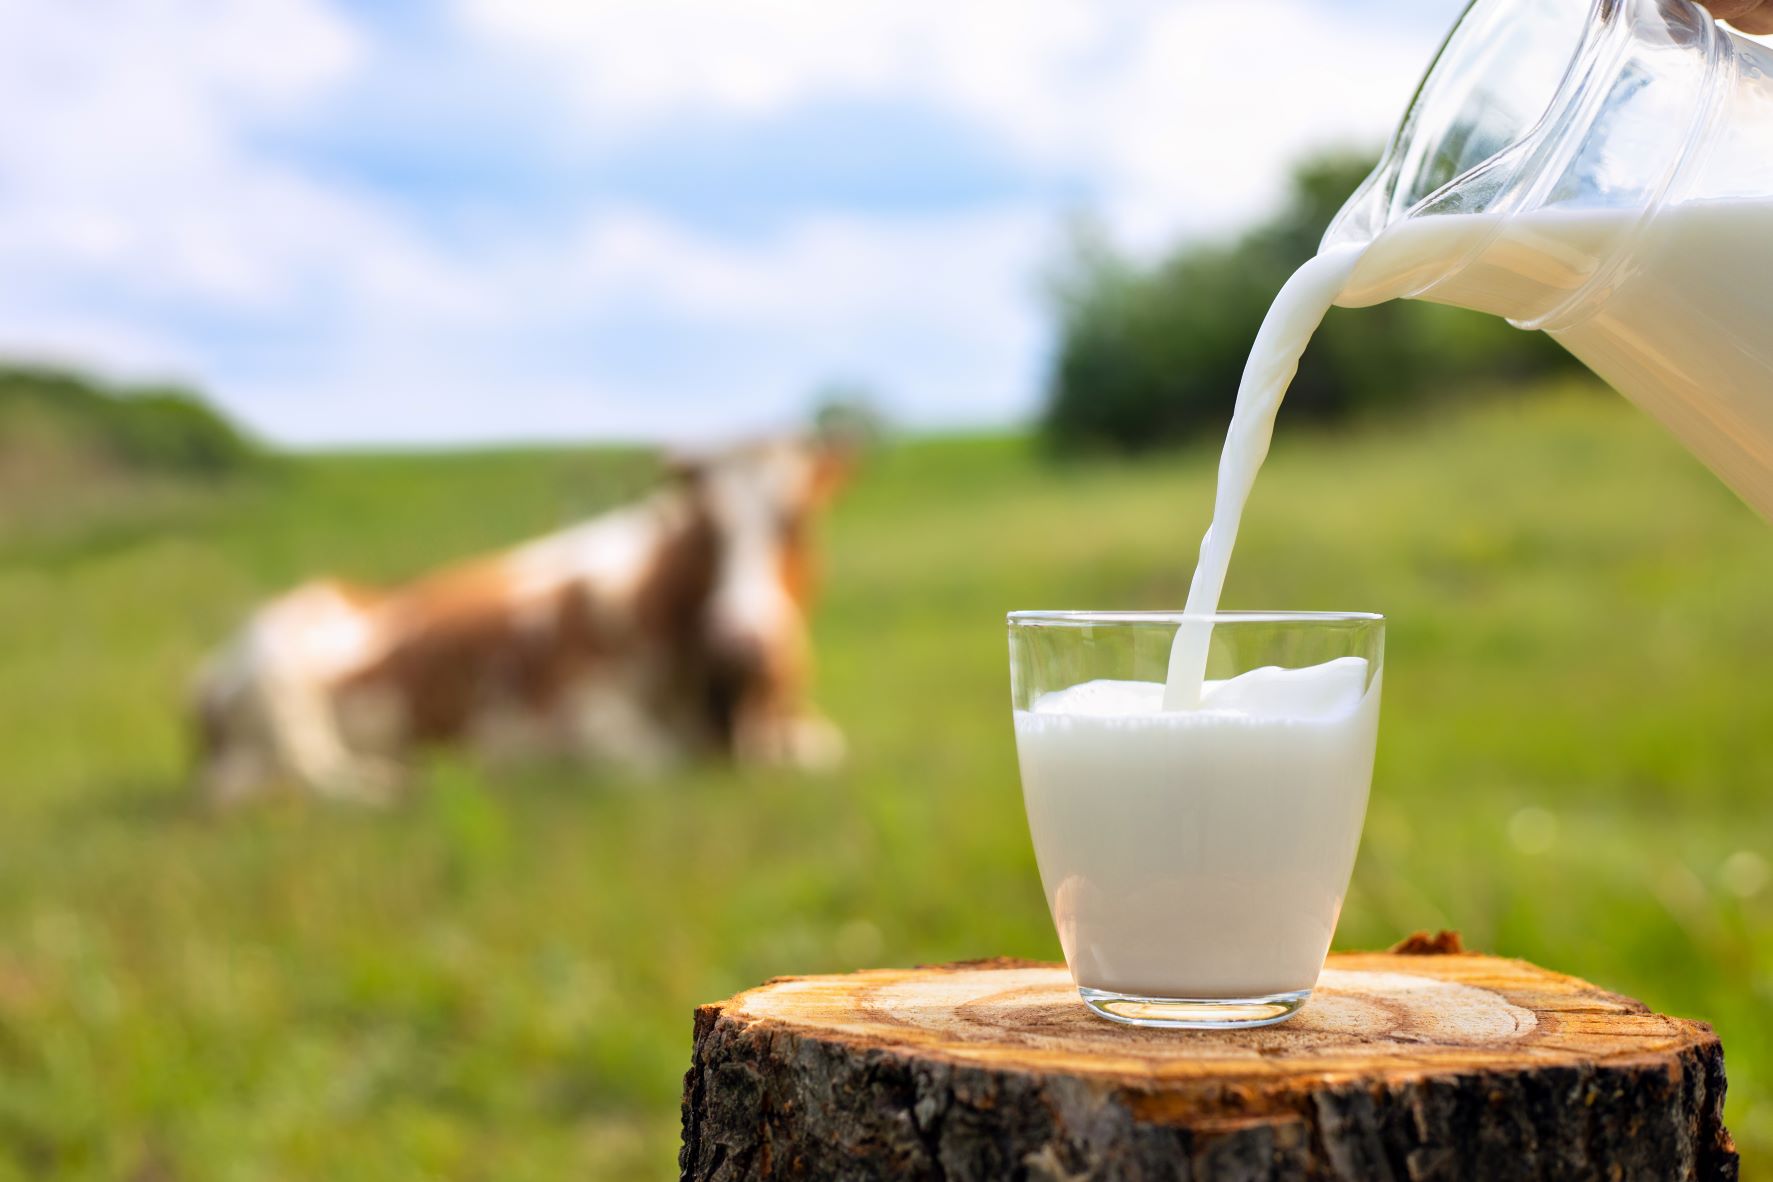 Pouring milk into a glass, cow and meadow in background